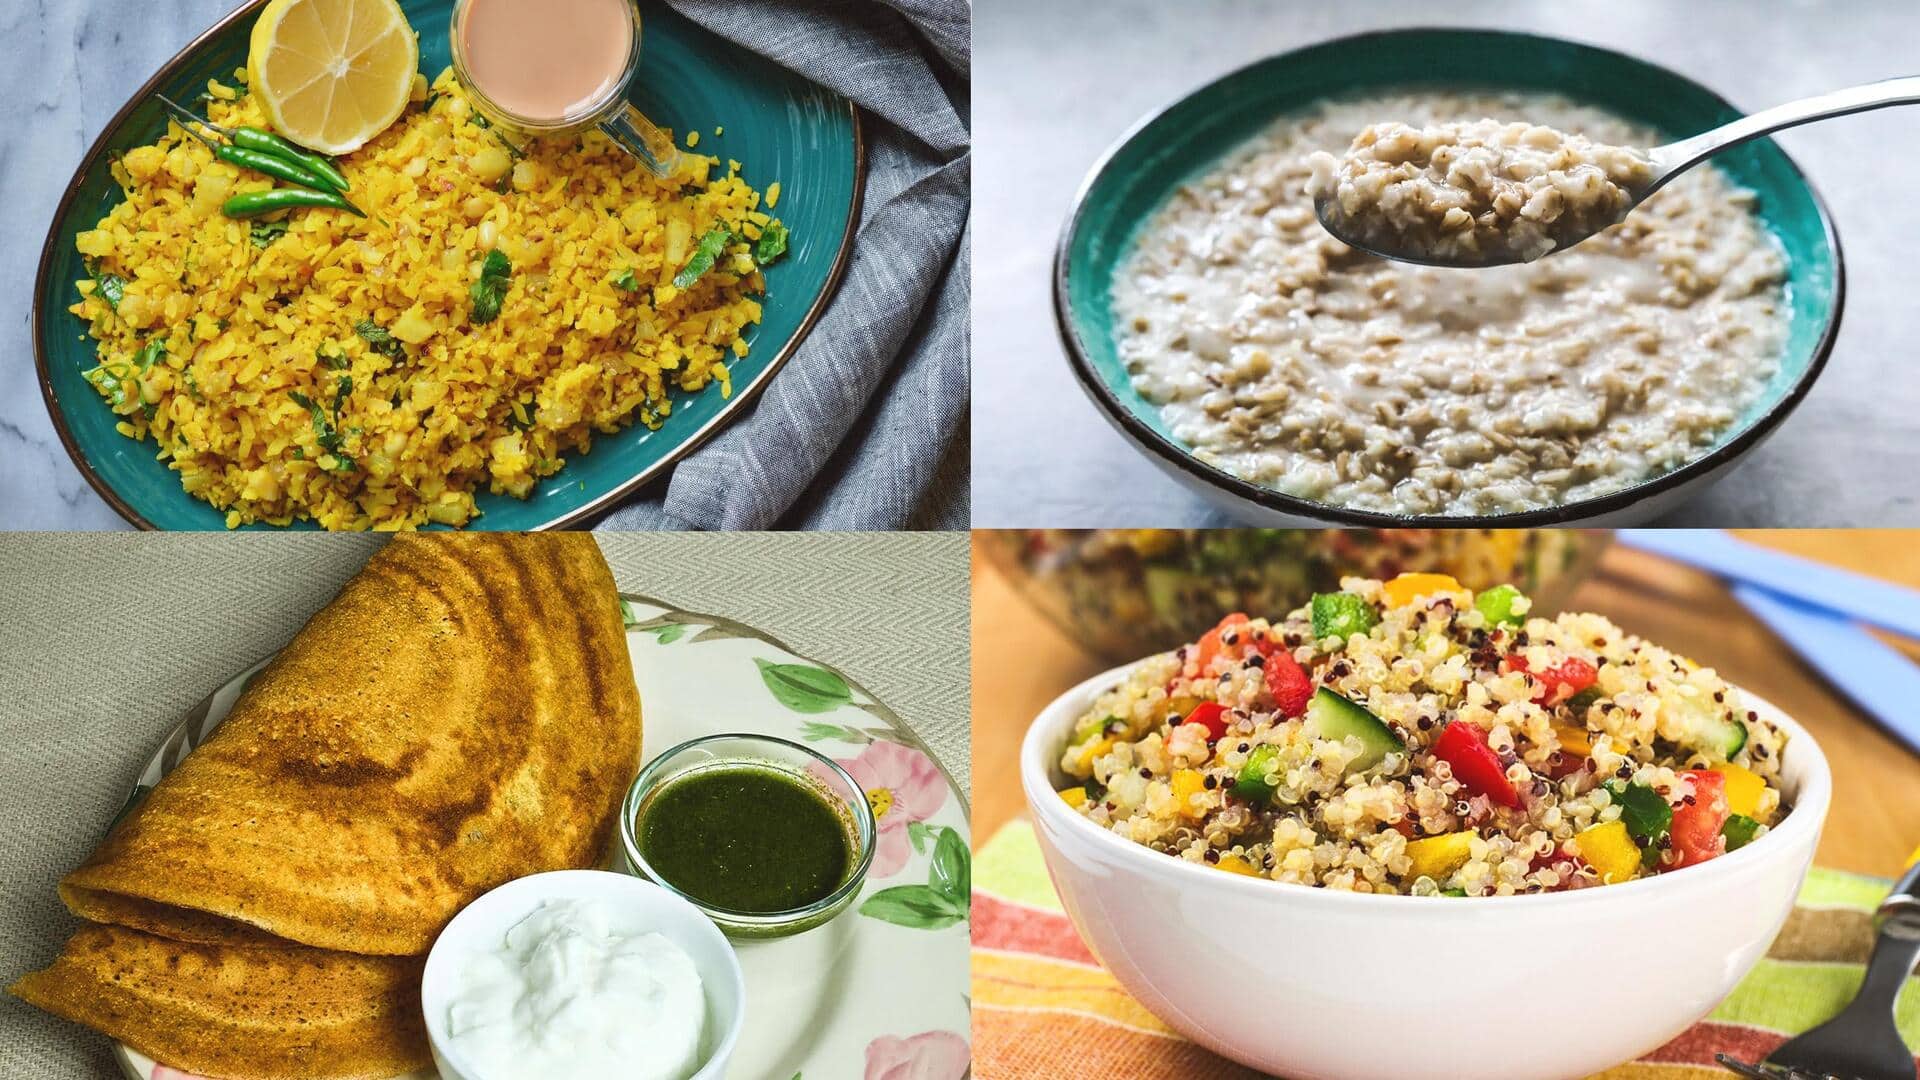 Make your breakfast healthy with these high-fiber Indian dishes